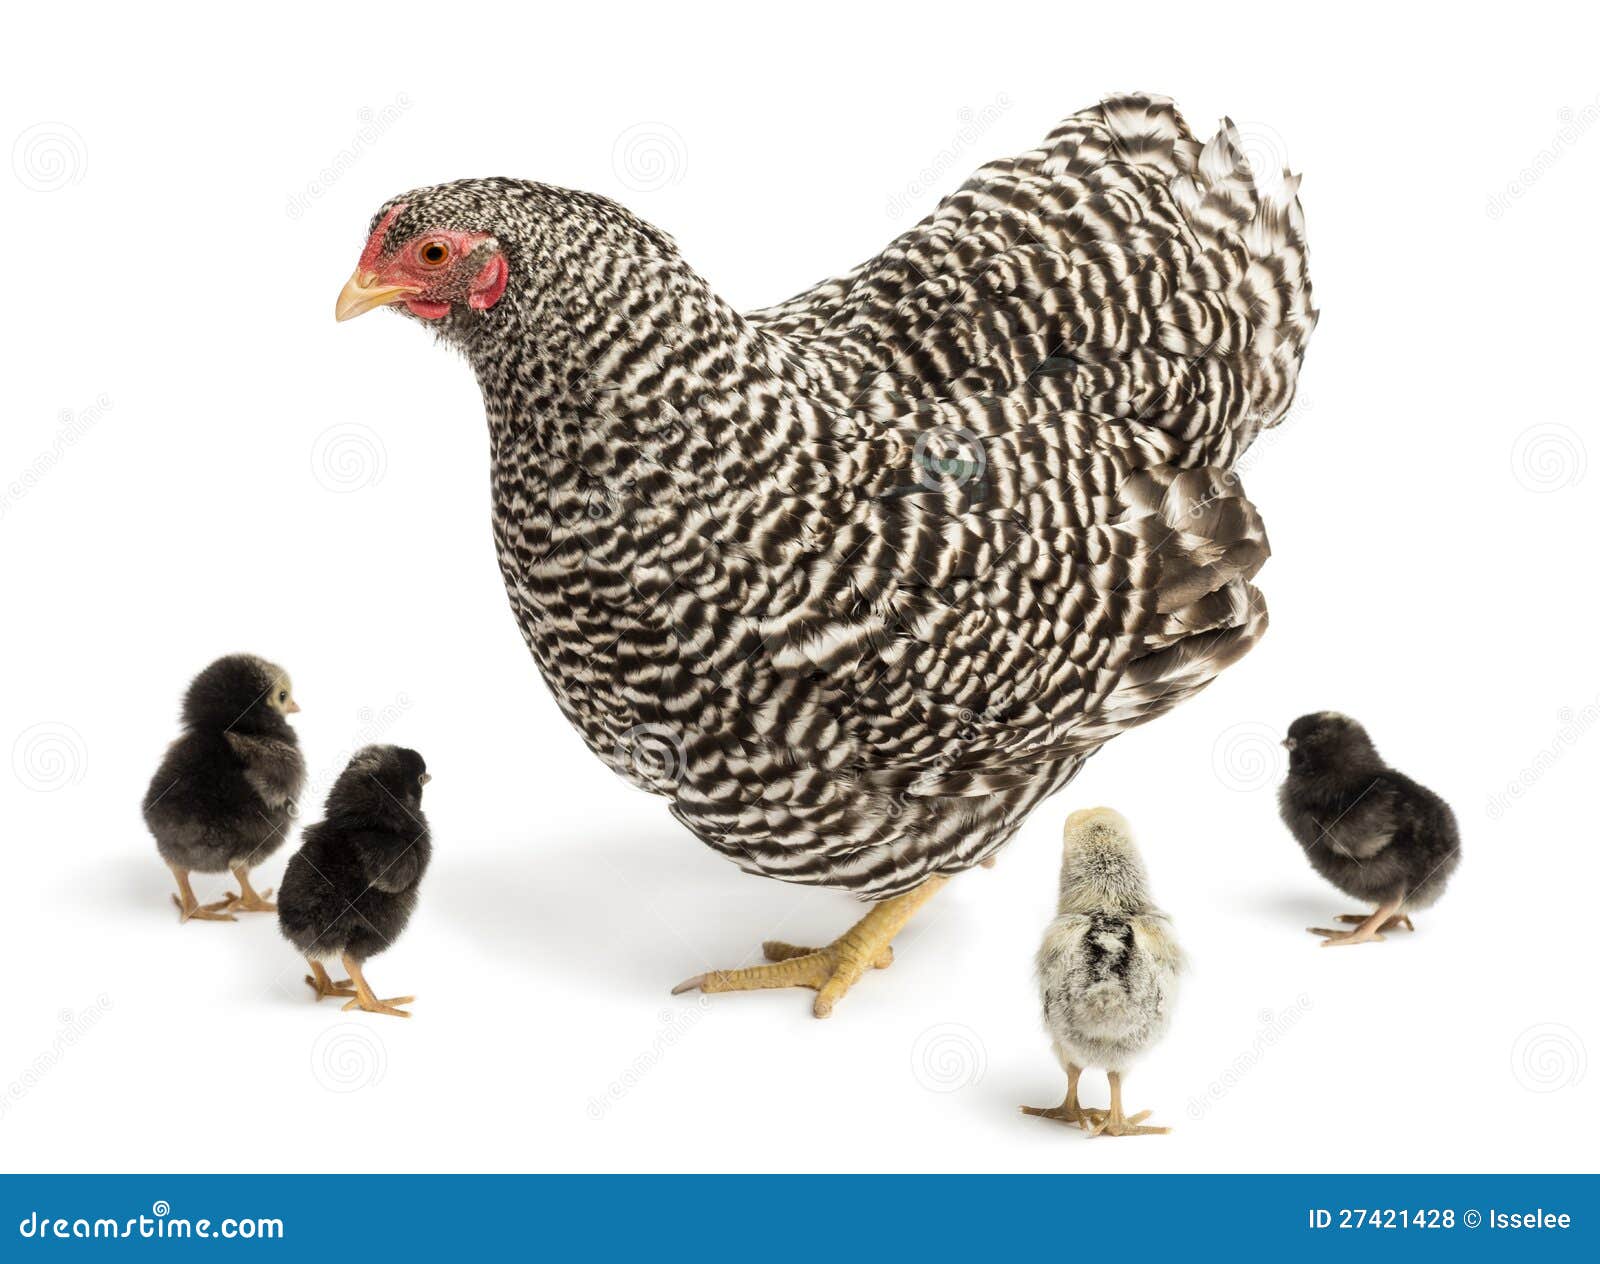 royalty free stock photos mother hen its chicks image